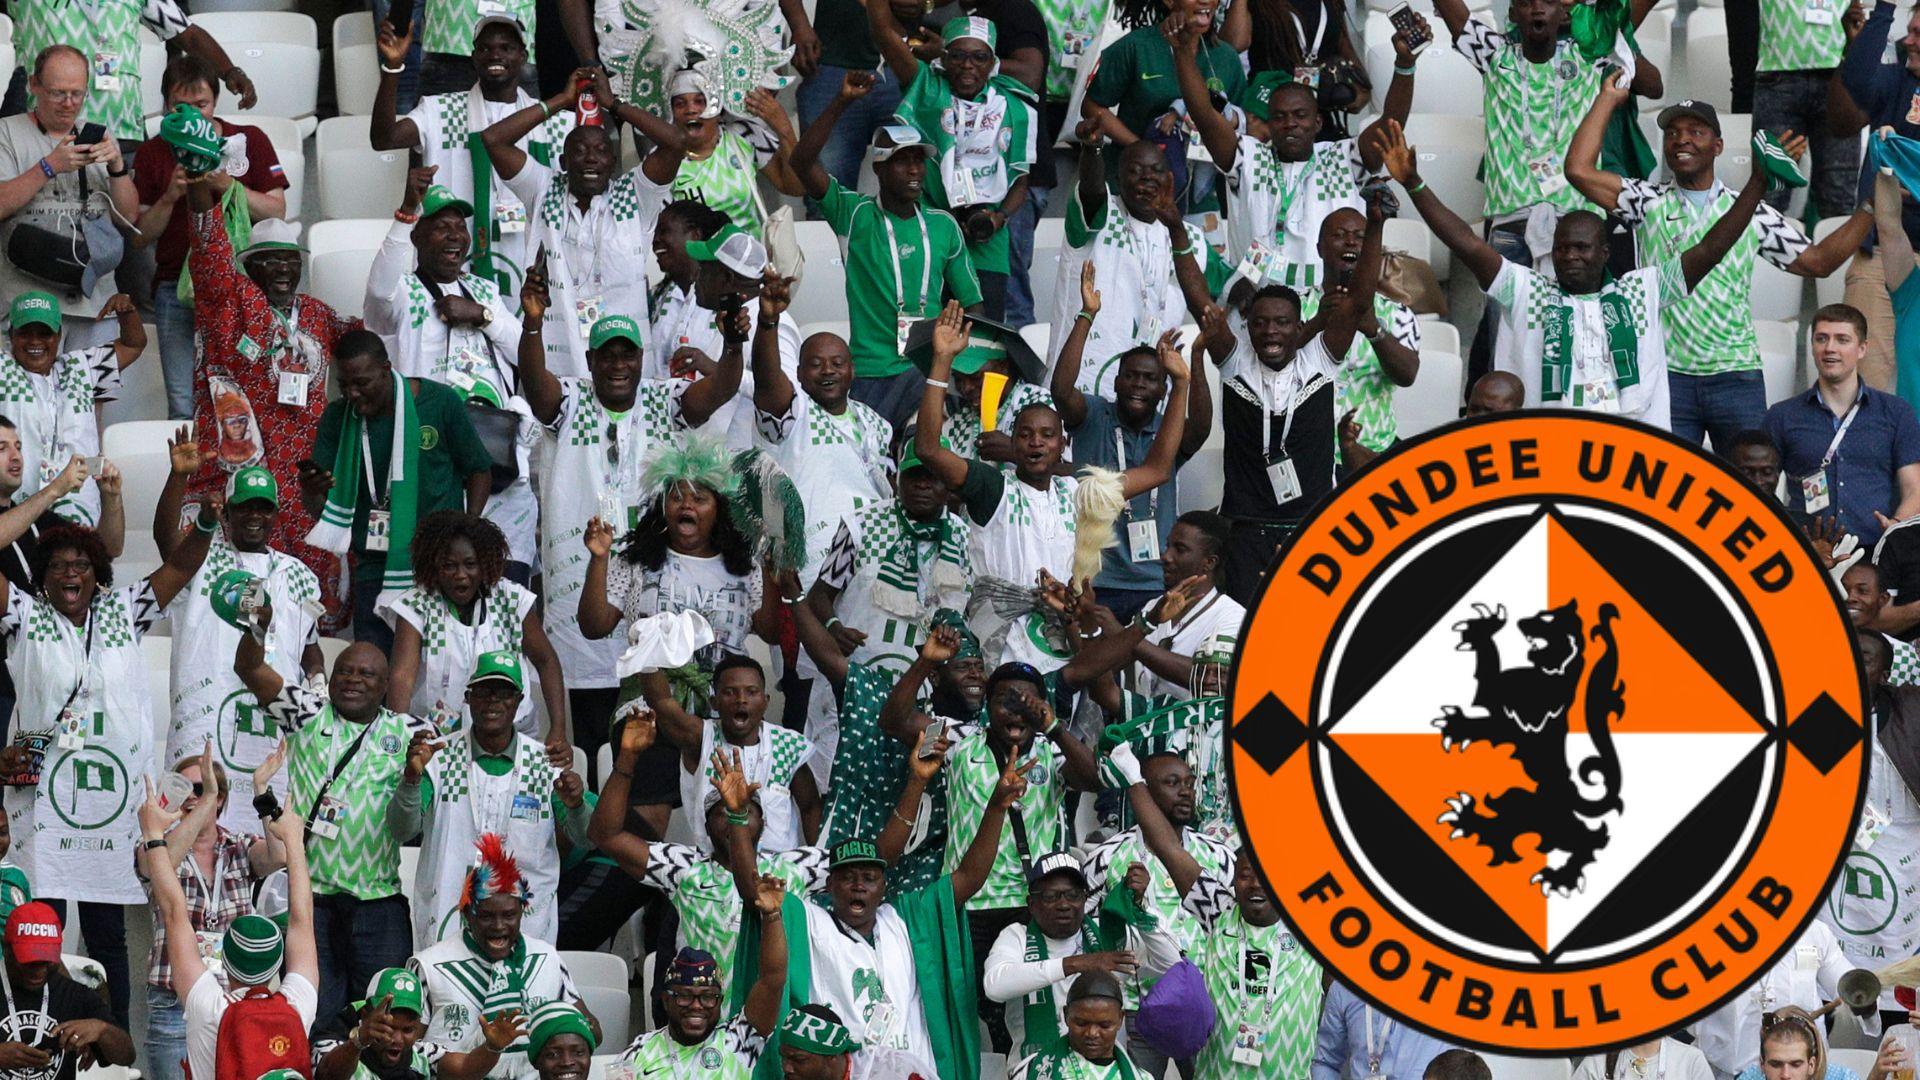 A Dundee United flag superimposed in front of Nigeria fans